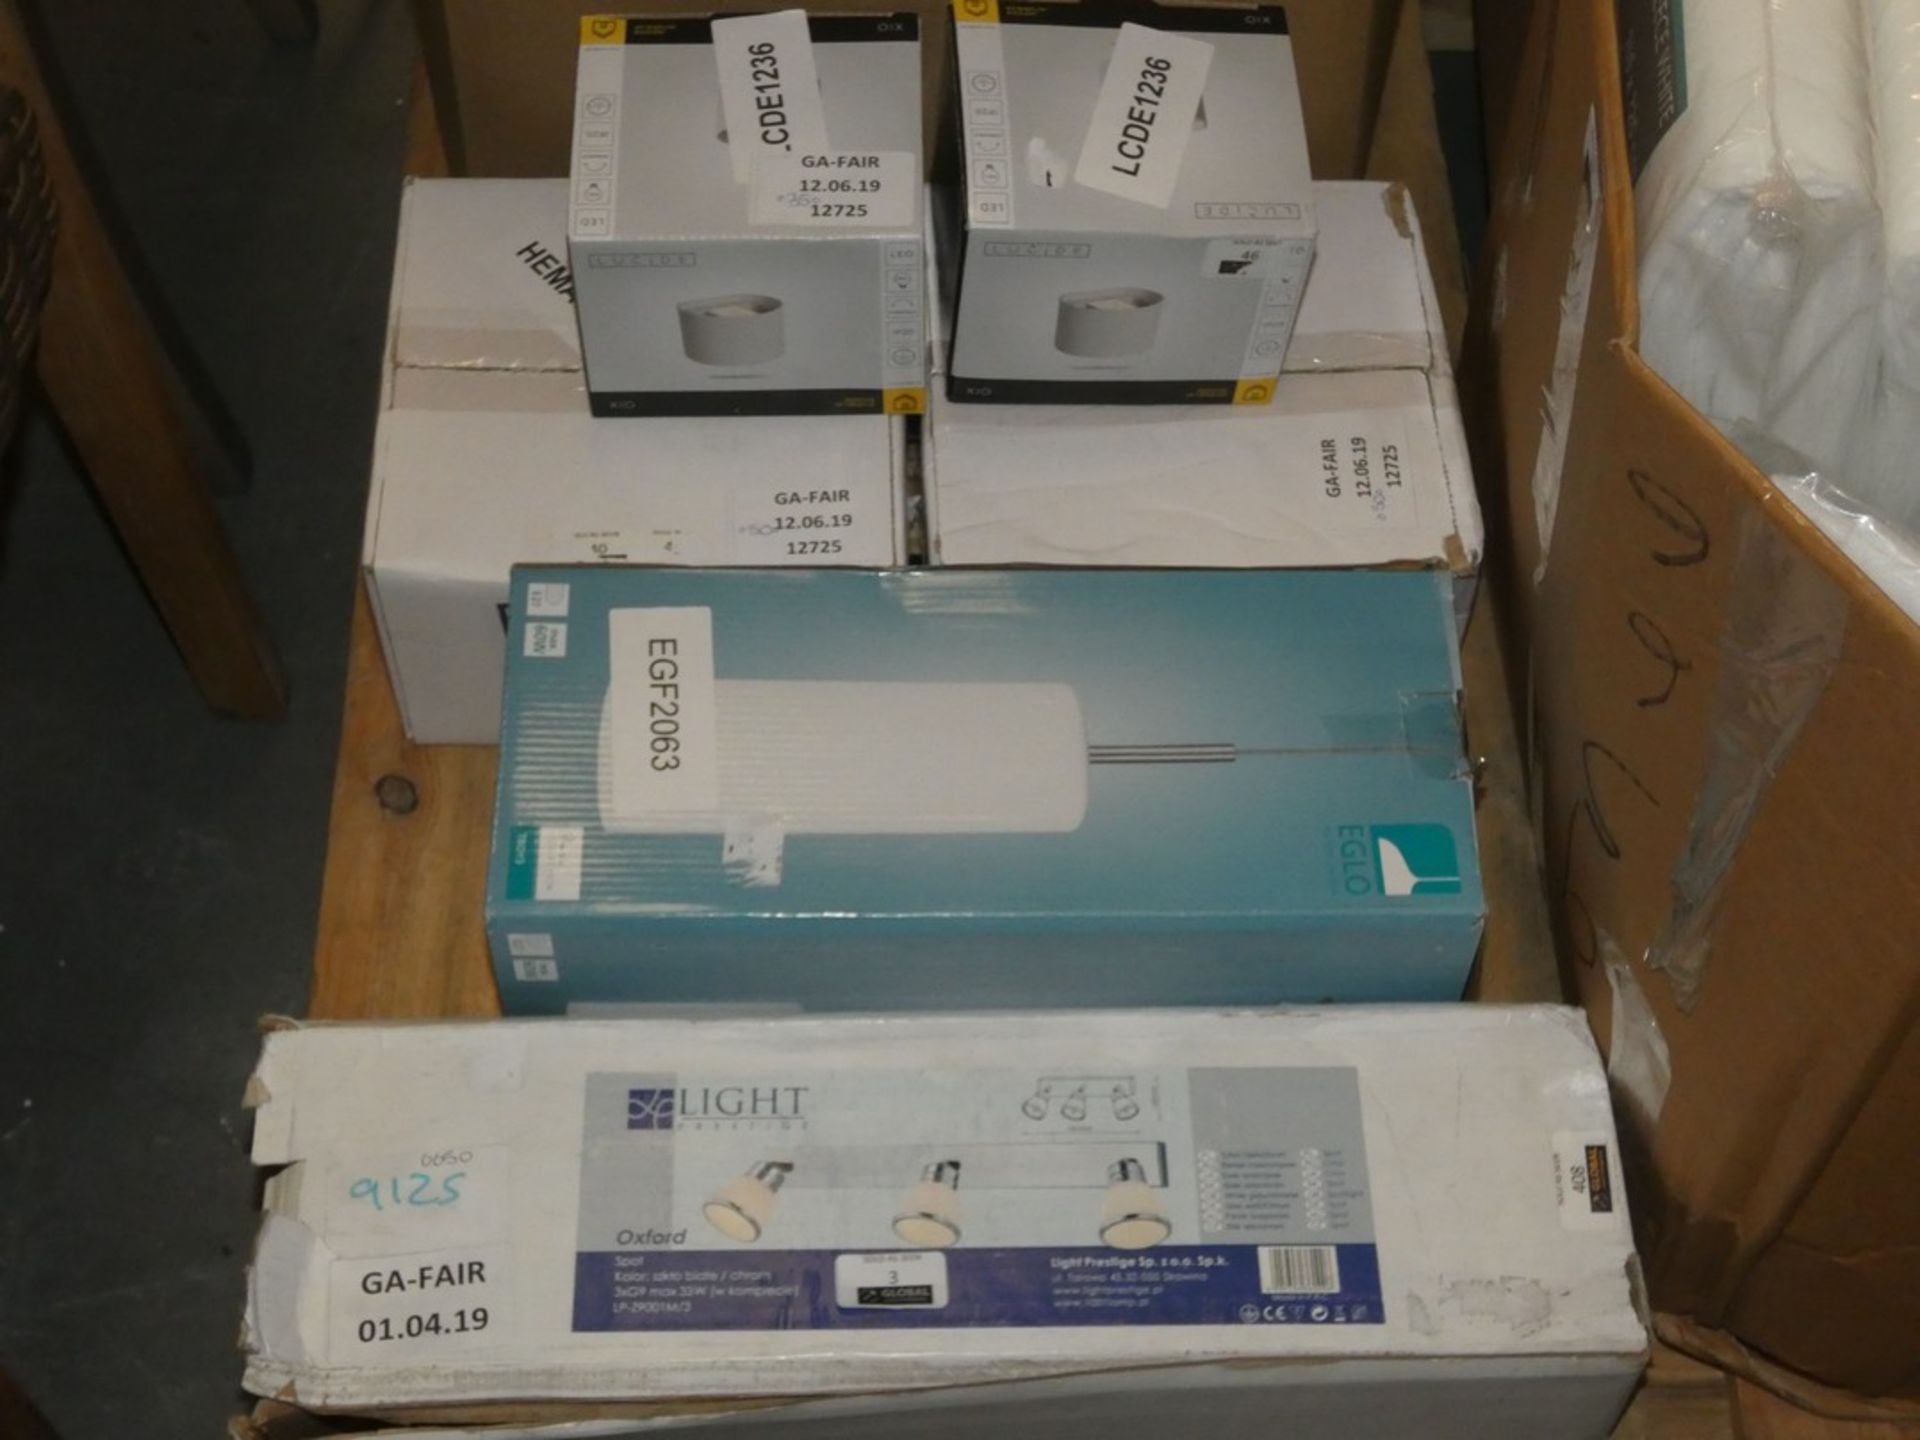 Boxed Assorted Lighting Items to Include a Light Prestige Ceiling Light, Eglo Ceiling Light and 2